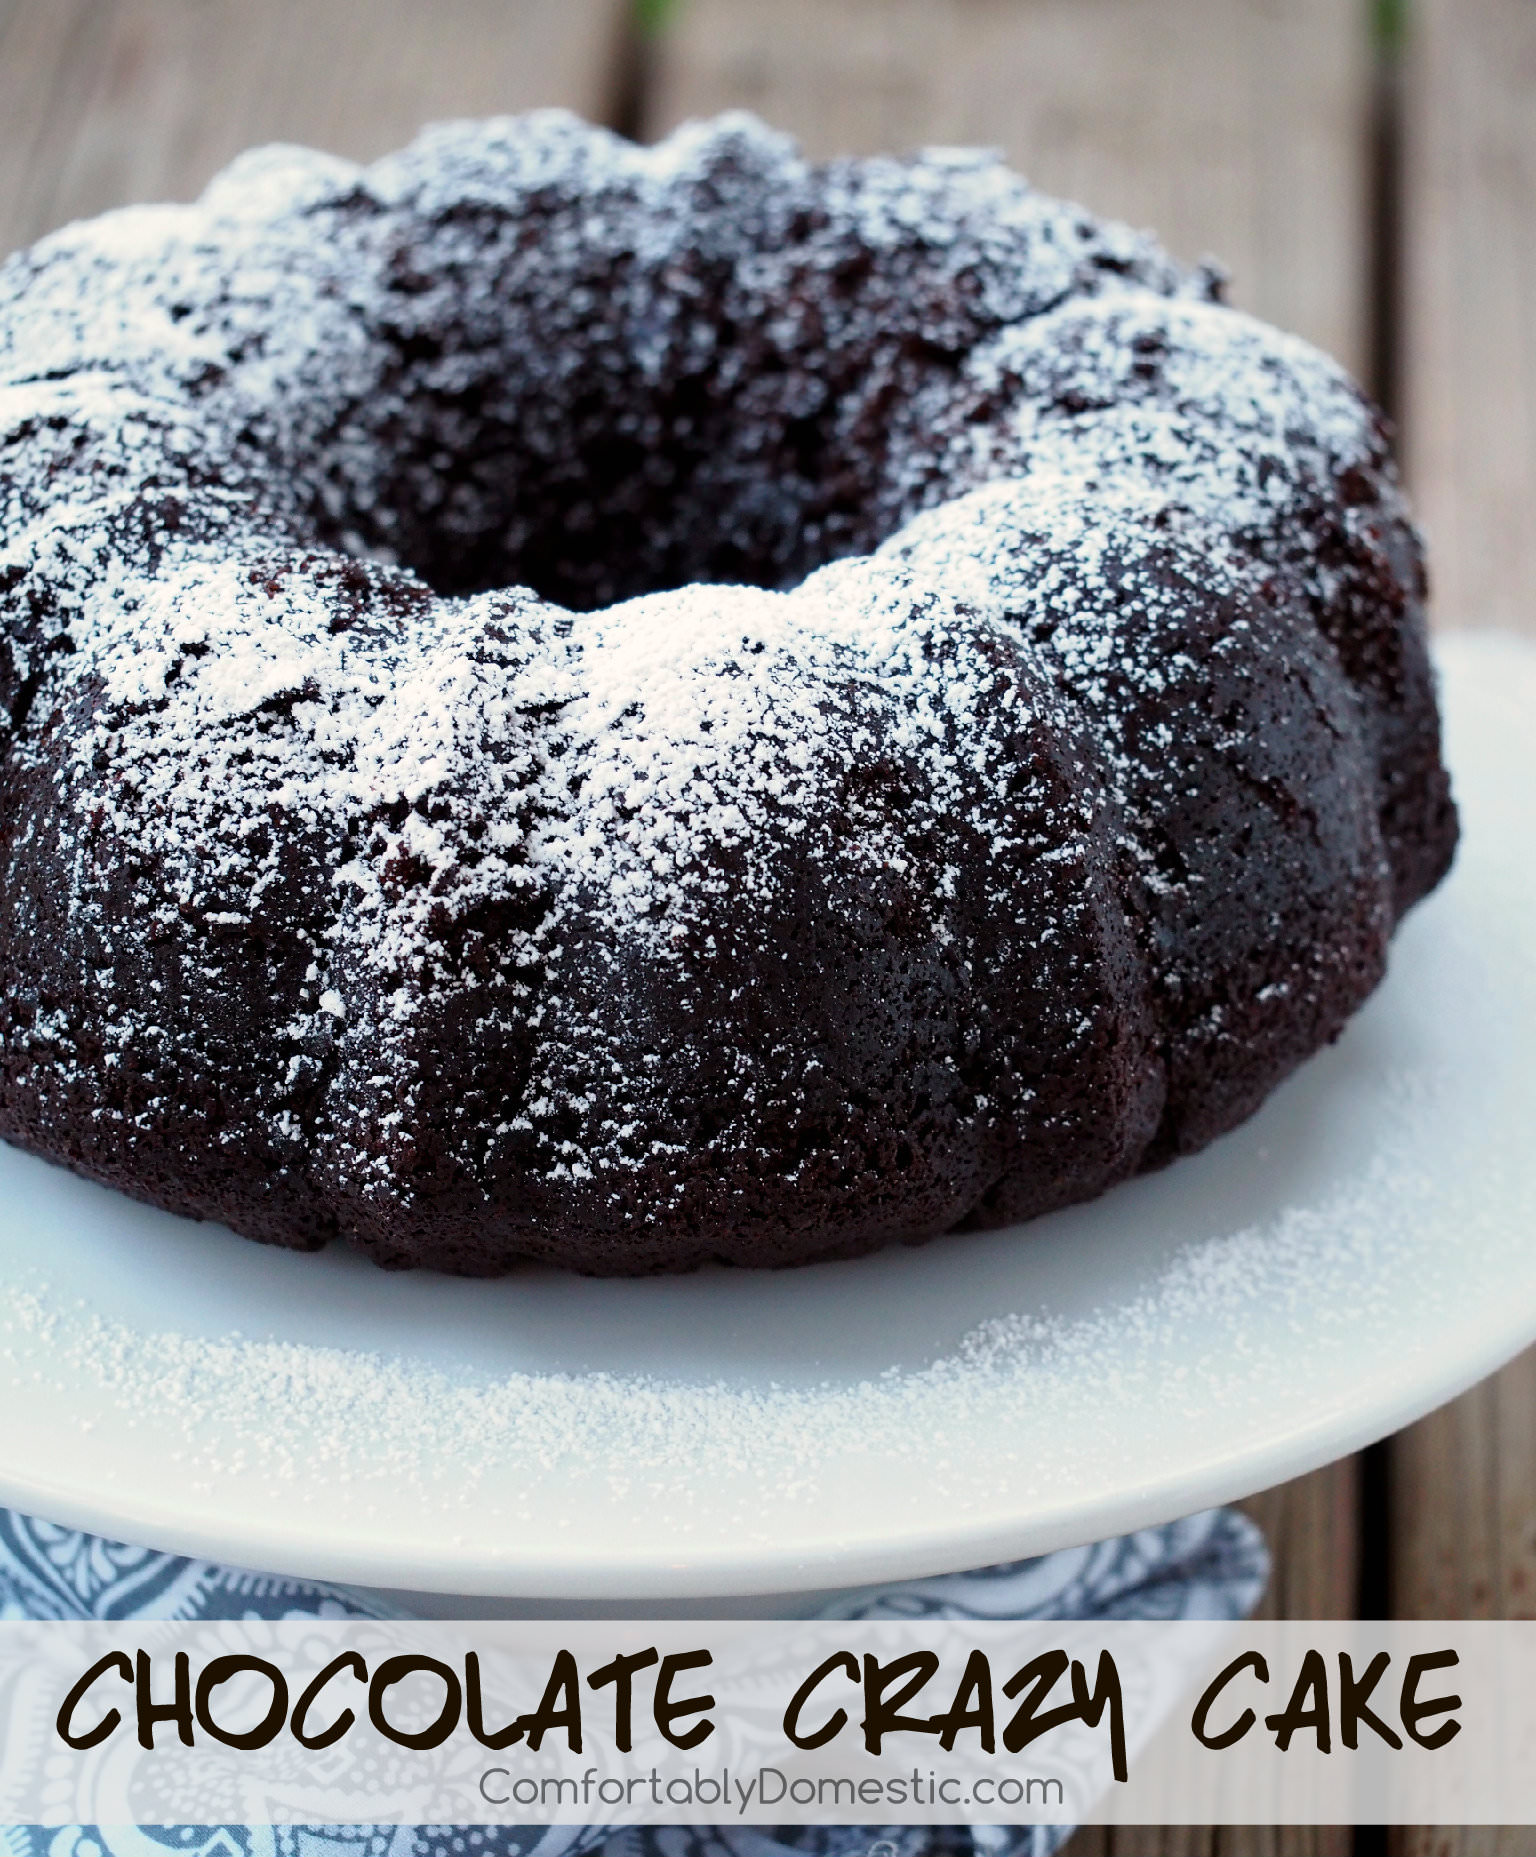 Chocolate Crazy Cake - A sinfully decadent chocolate cake made from scratch that comes together in a jiffy. The recipe is a little crazy because it’s made without eggs, and yet the resulting cake is still rich with a tender crumb. | ComfortablyDomestic.com